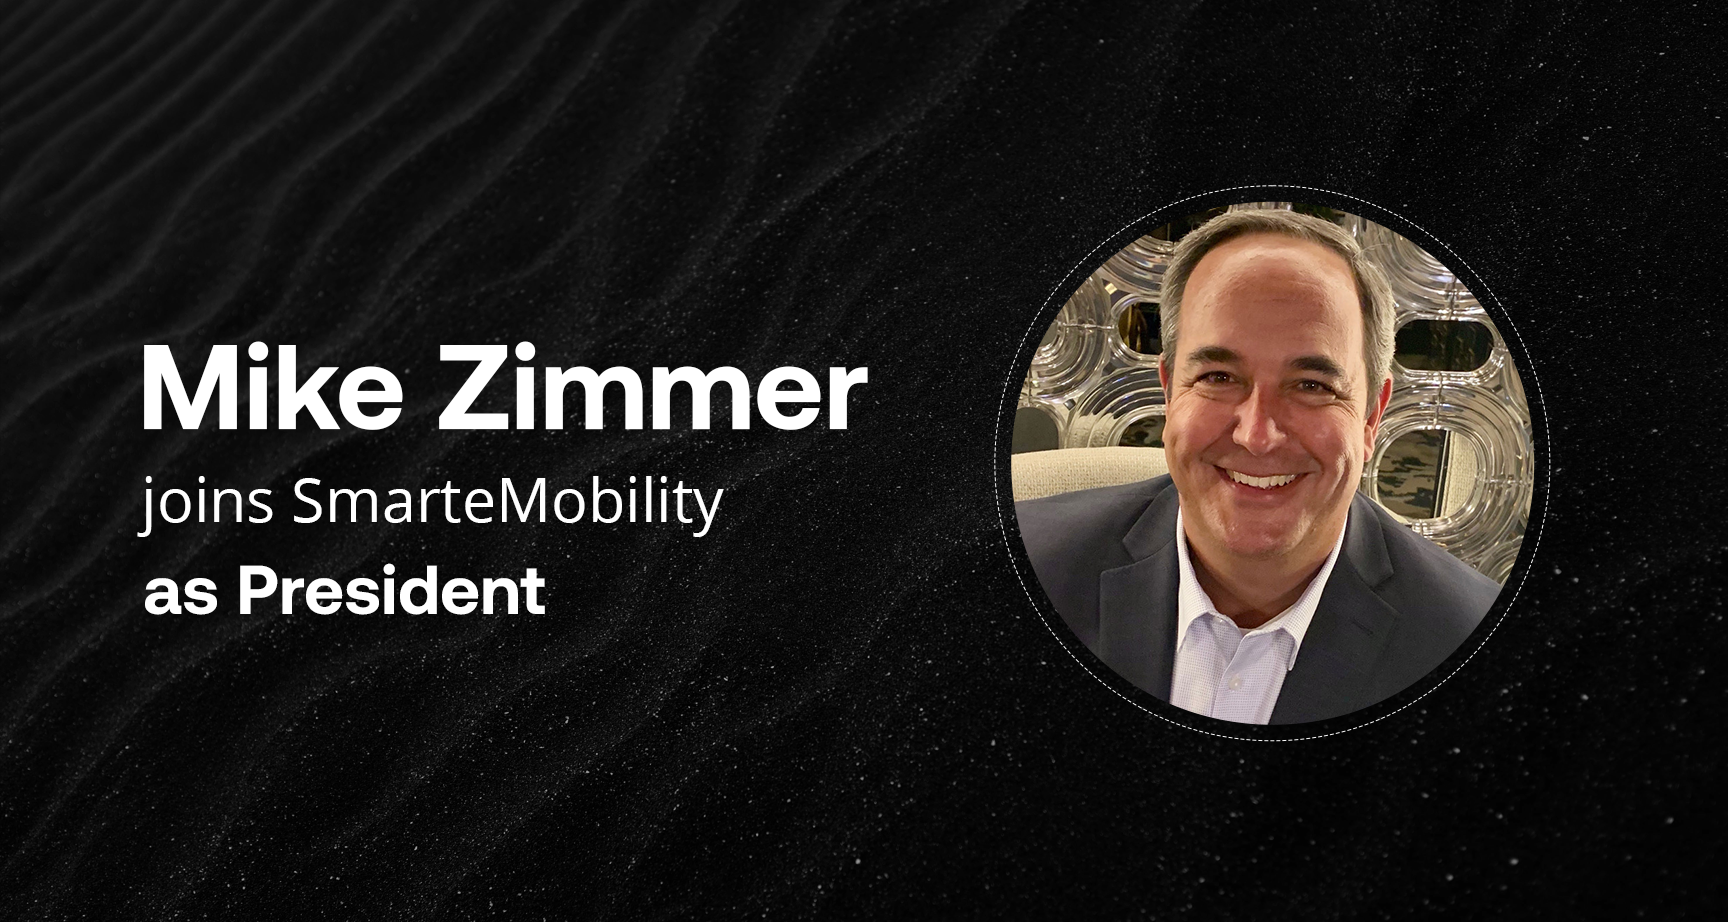 Mike Zimmer Joins SmarteMobility as President